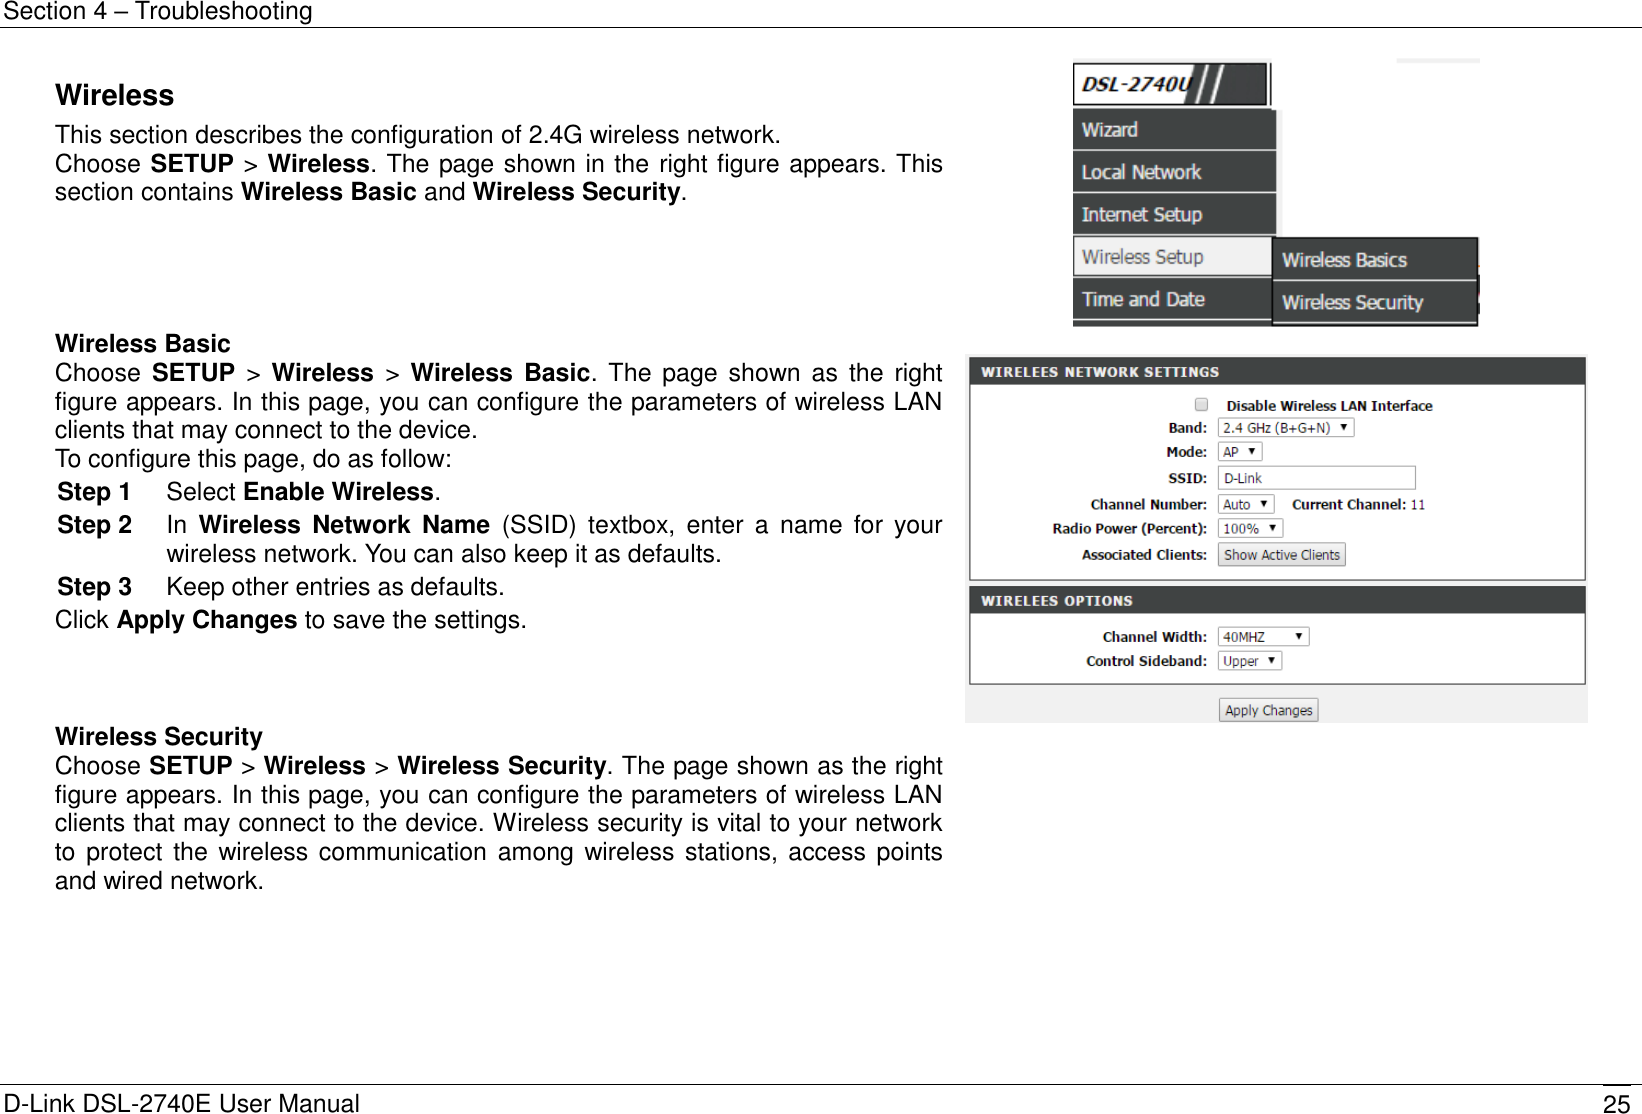 Section 4 – Troubleshooting D-Link DSL-2740E User Manual 25 Wireless This section describes the configuration of 2.4G wireless network. Choose SETUP &gt; Wireless. The page shown in the right figure appears. This section contains Wireless Basic and Wireless Security.  Wireless Basic Choose  SETUP  &gt;  Wireless  &gt;  Wireless  Basic. The  page shown as  the right figure appears. In this page, you can configure the parameters of wireless LAN clients that may connect to the device. To configure this page, do as follow: Step 1  Select Enable Wireless. Step 2  In  Wireless  Network Name  (SSID)  textbox,  enter  a  name  for  your wireless network. You can also keep it as defaults. Step 3  Keep other entries as defaults. Click Apply Changes to save the settings.    Wireless Security Choose SETUP &gt; Wireless &gt; Wireless Security. The page shown as the right figure appears. In this page, you can configure the parameters of wireless LAN clients that may connect to the device. Wireless security is vital to your network to protect the wireless communication among wireless stations, access points and wired network.   